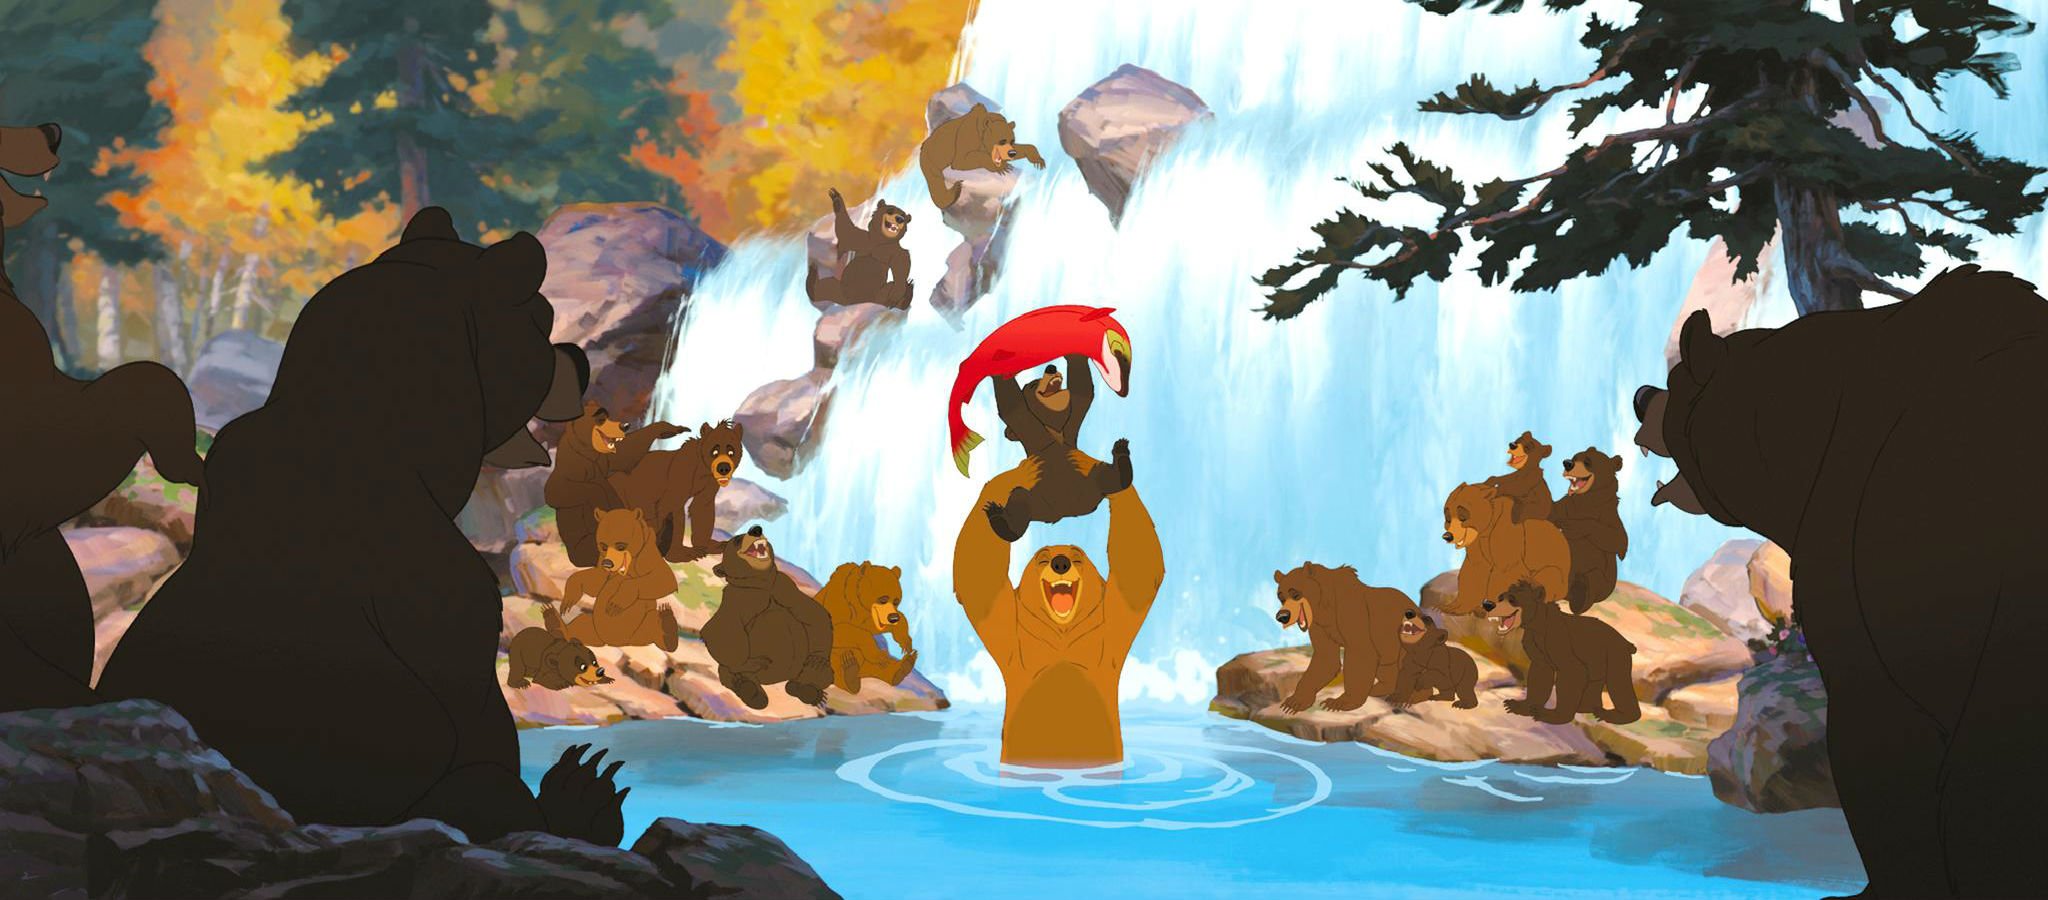 brother bear free and free download game